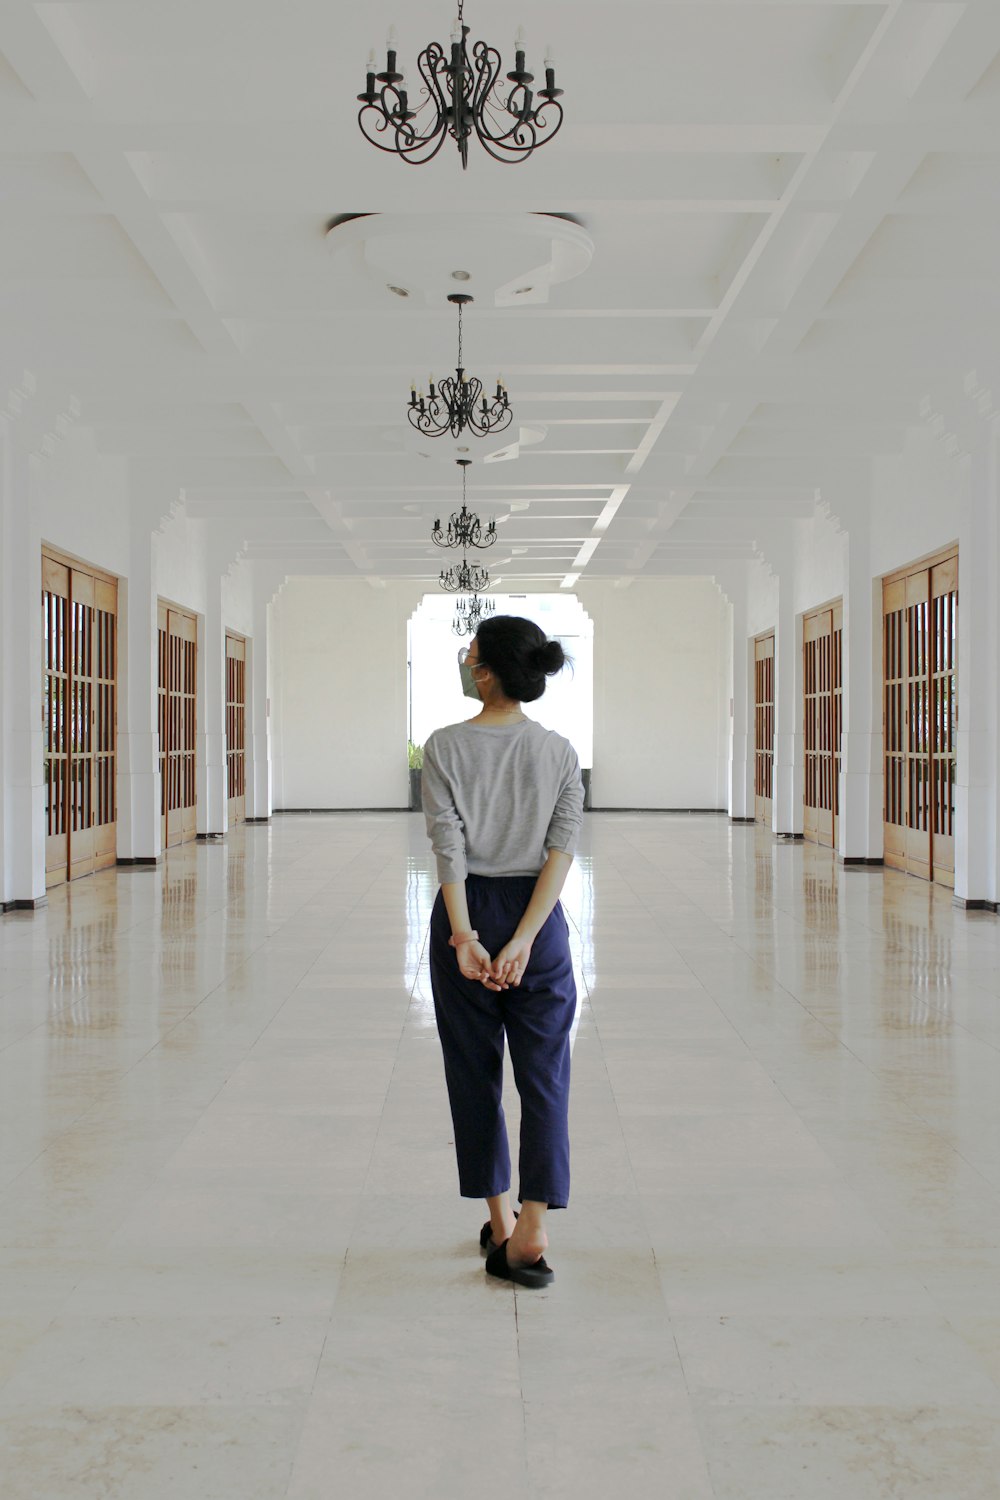 a woman standing in a hallway with a chandelier hanging from the ceiling